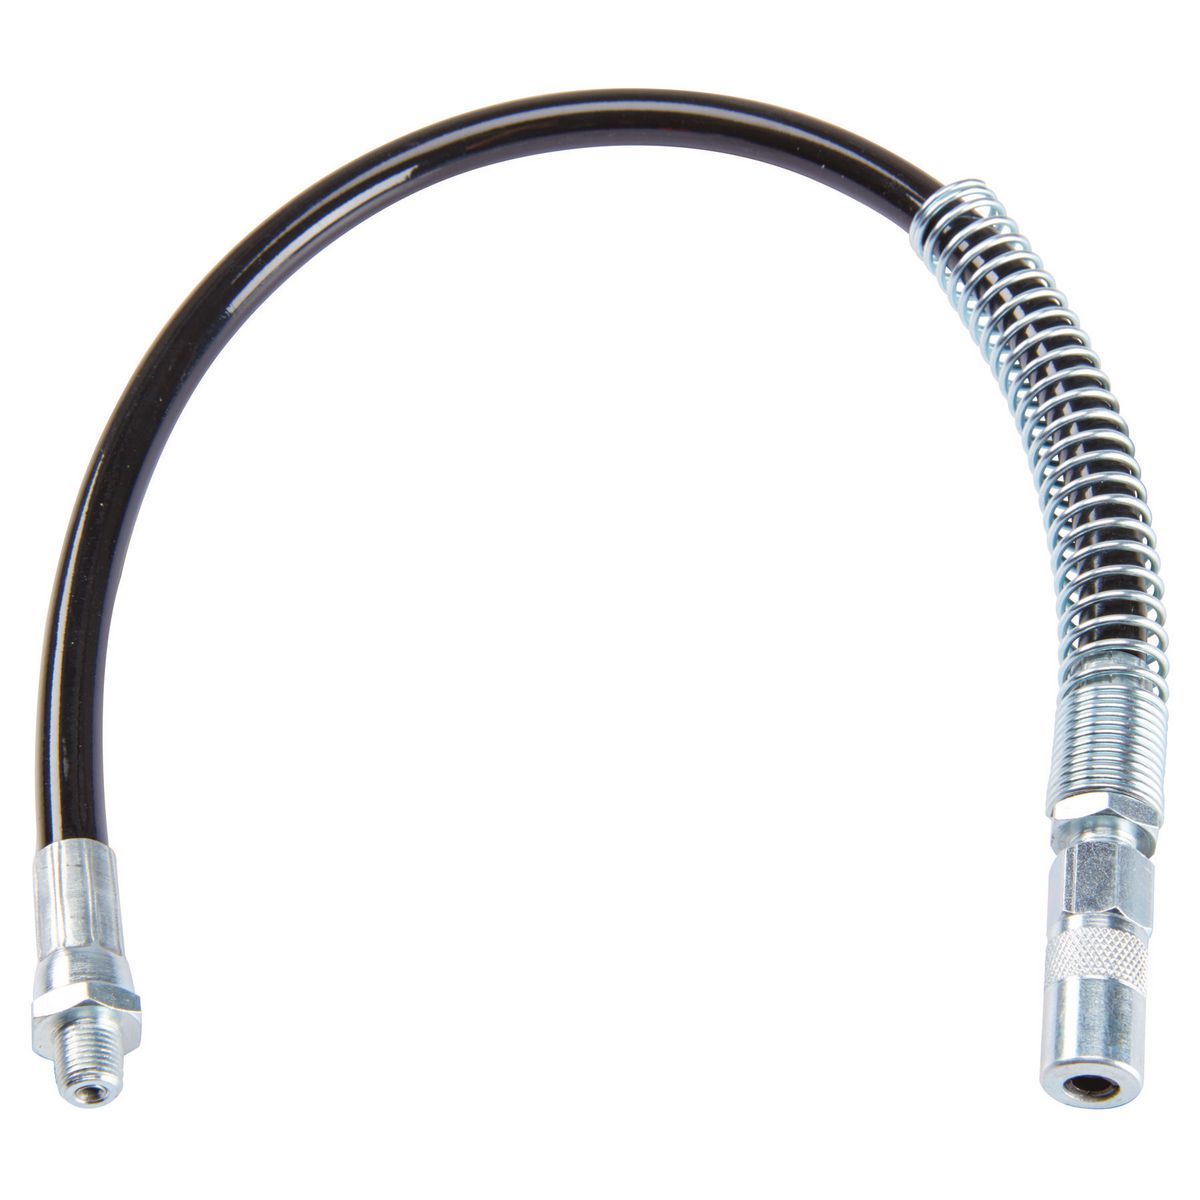 HOLT INDUSTRIES 18 in. Flexible Grease Hose with Heavy Duty Coupler